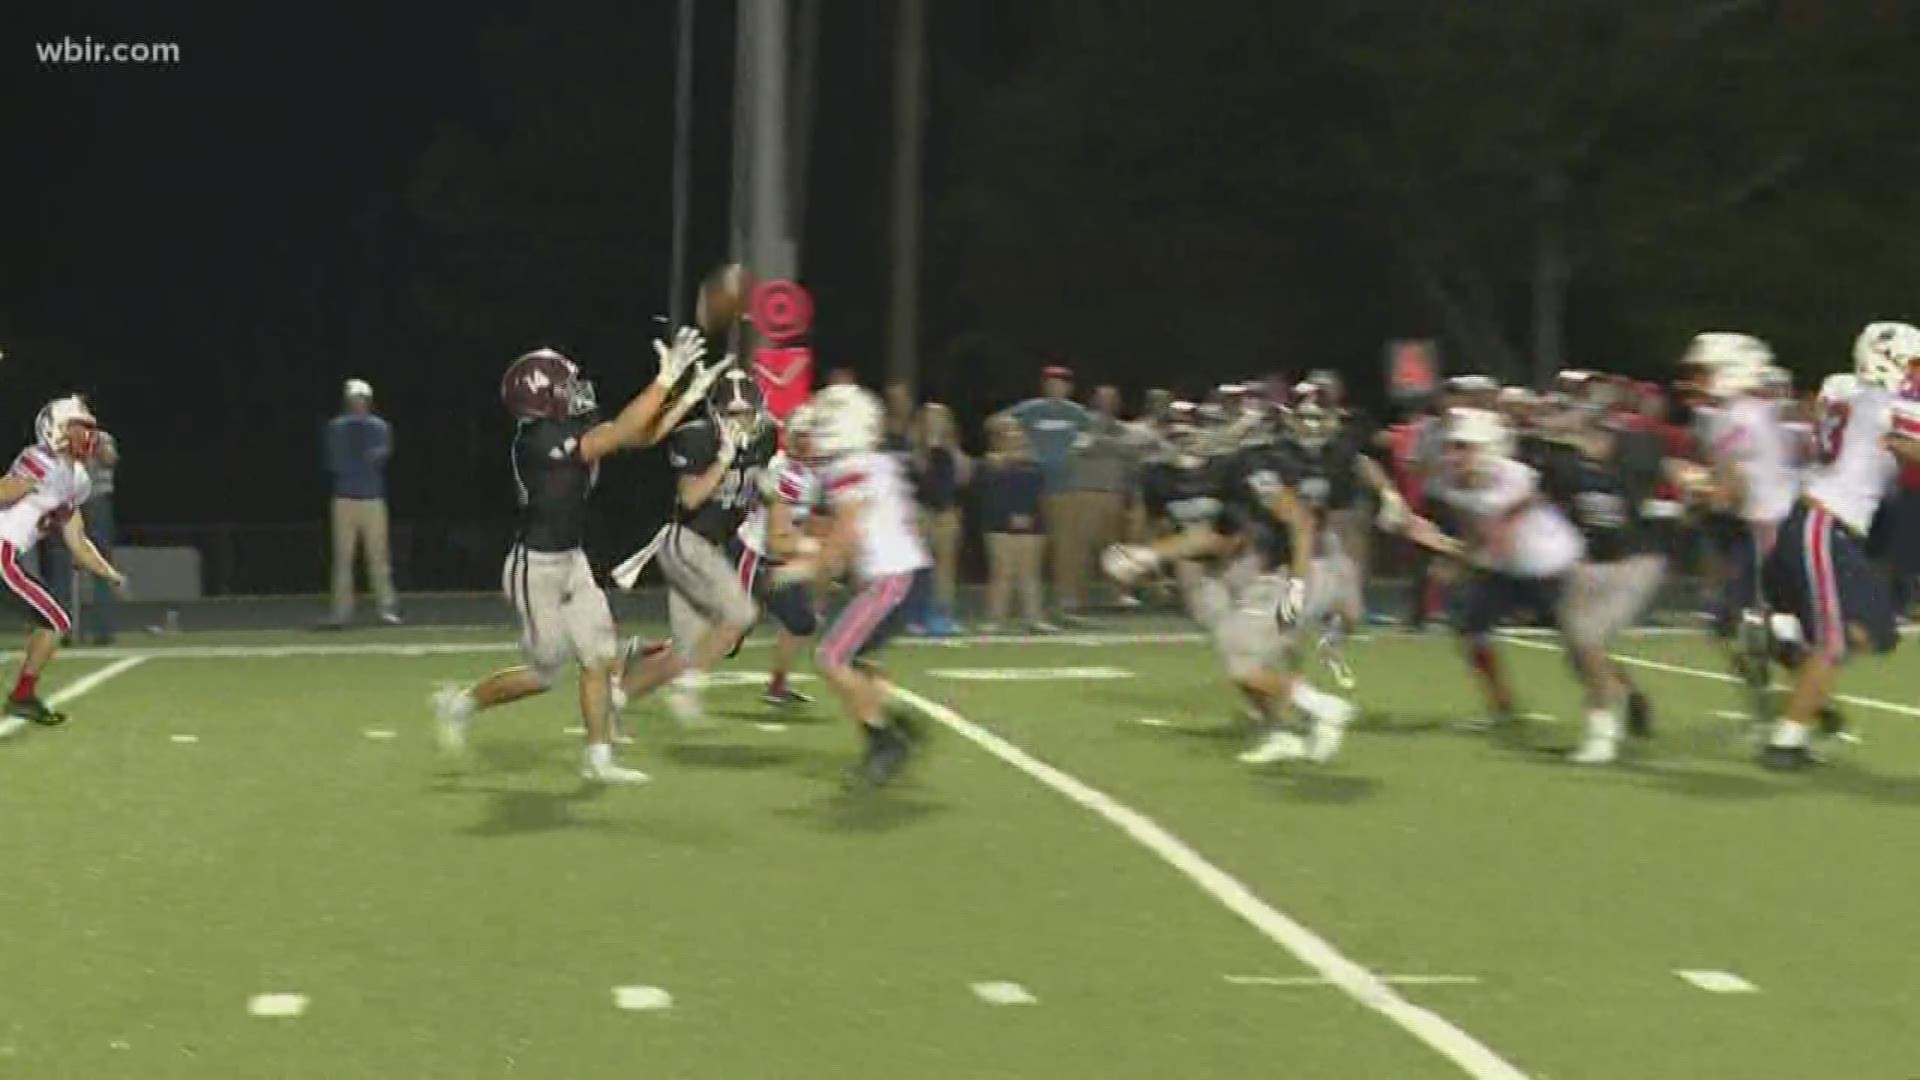 Bearden defeats Jefferson County after pulling away late.